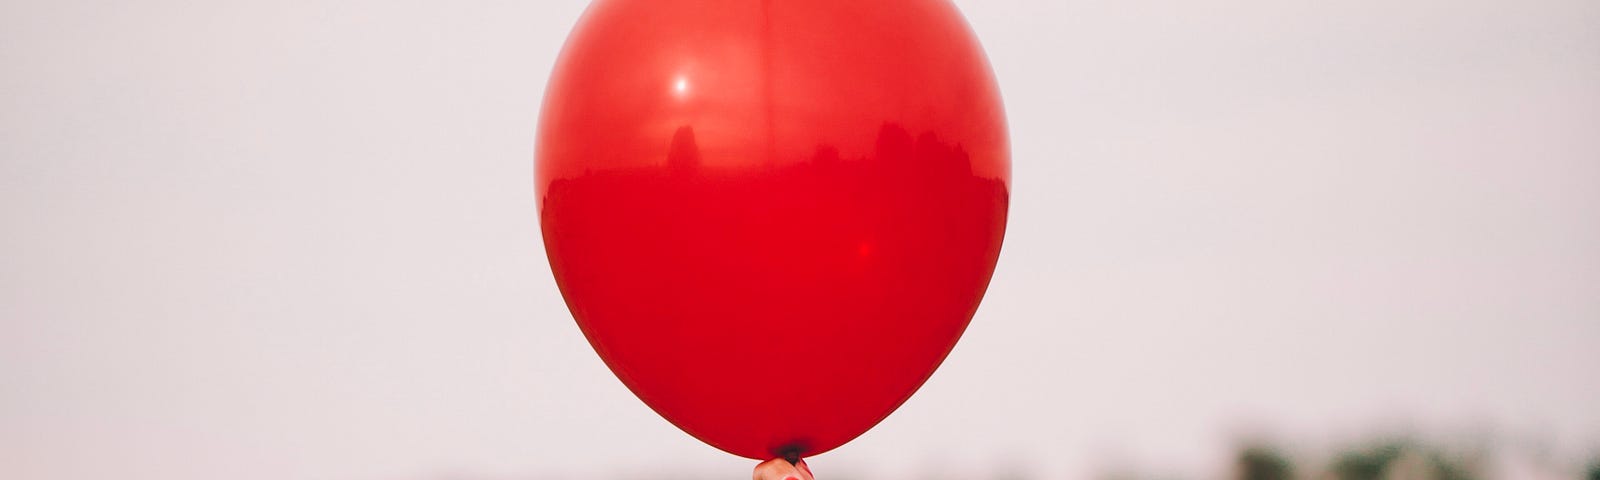 A red balloon in someone’s hand rising above greenery